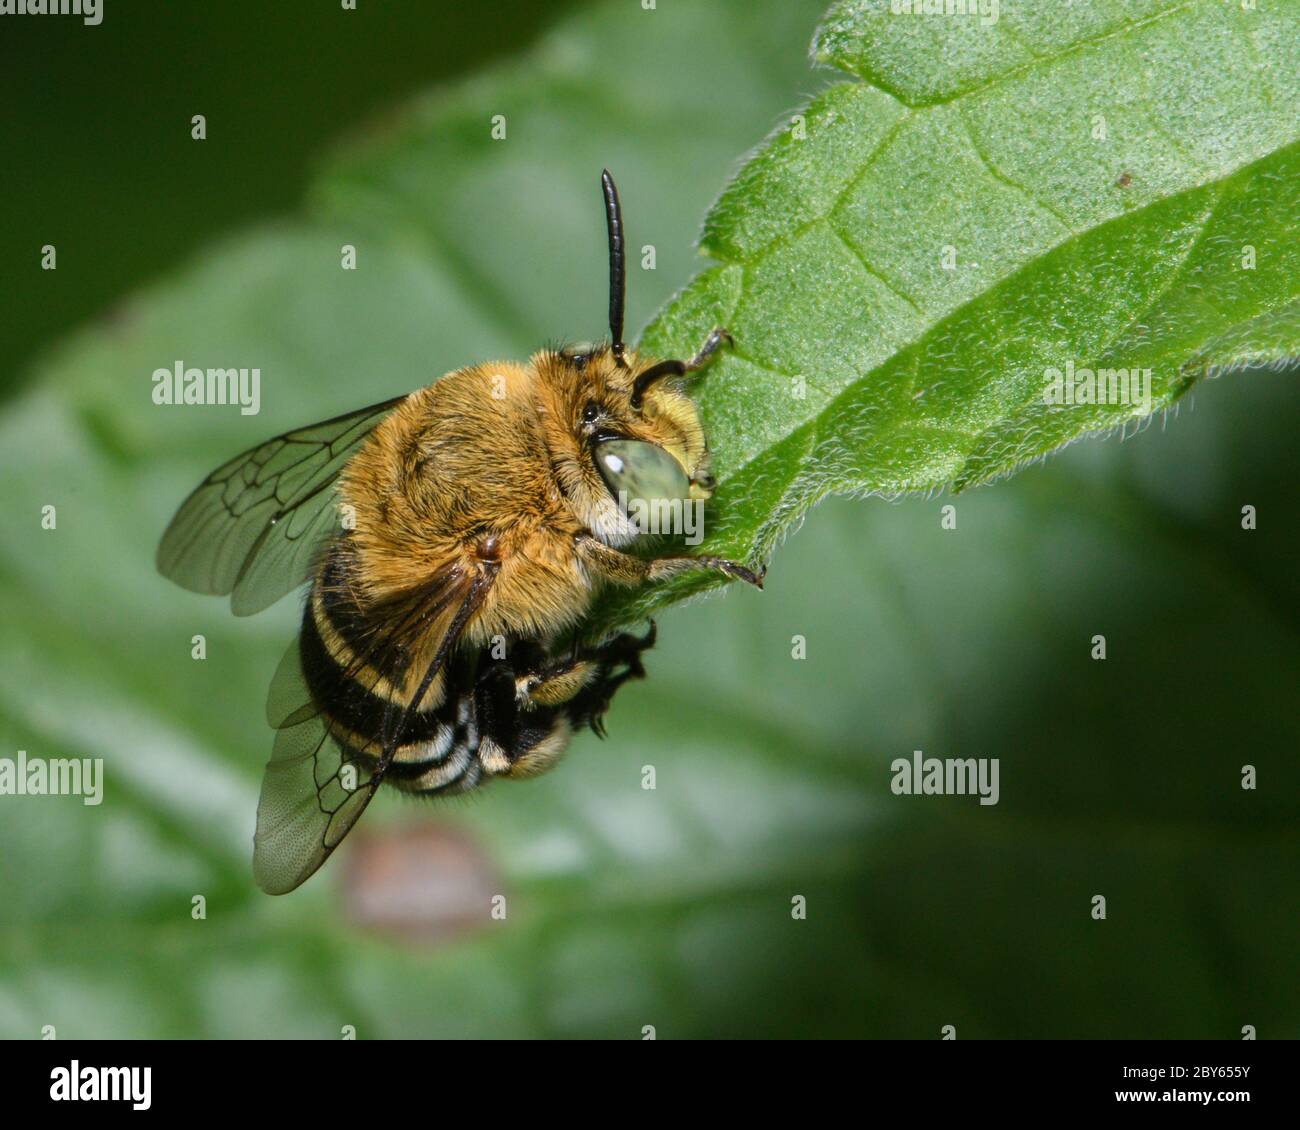 Blue Banded Bee resting on a leaf. Stock Photo